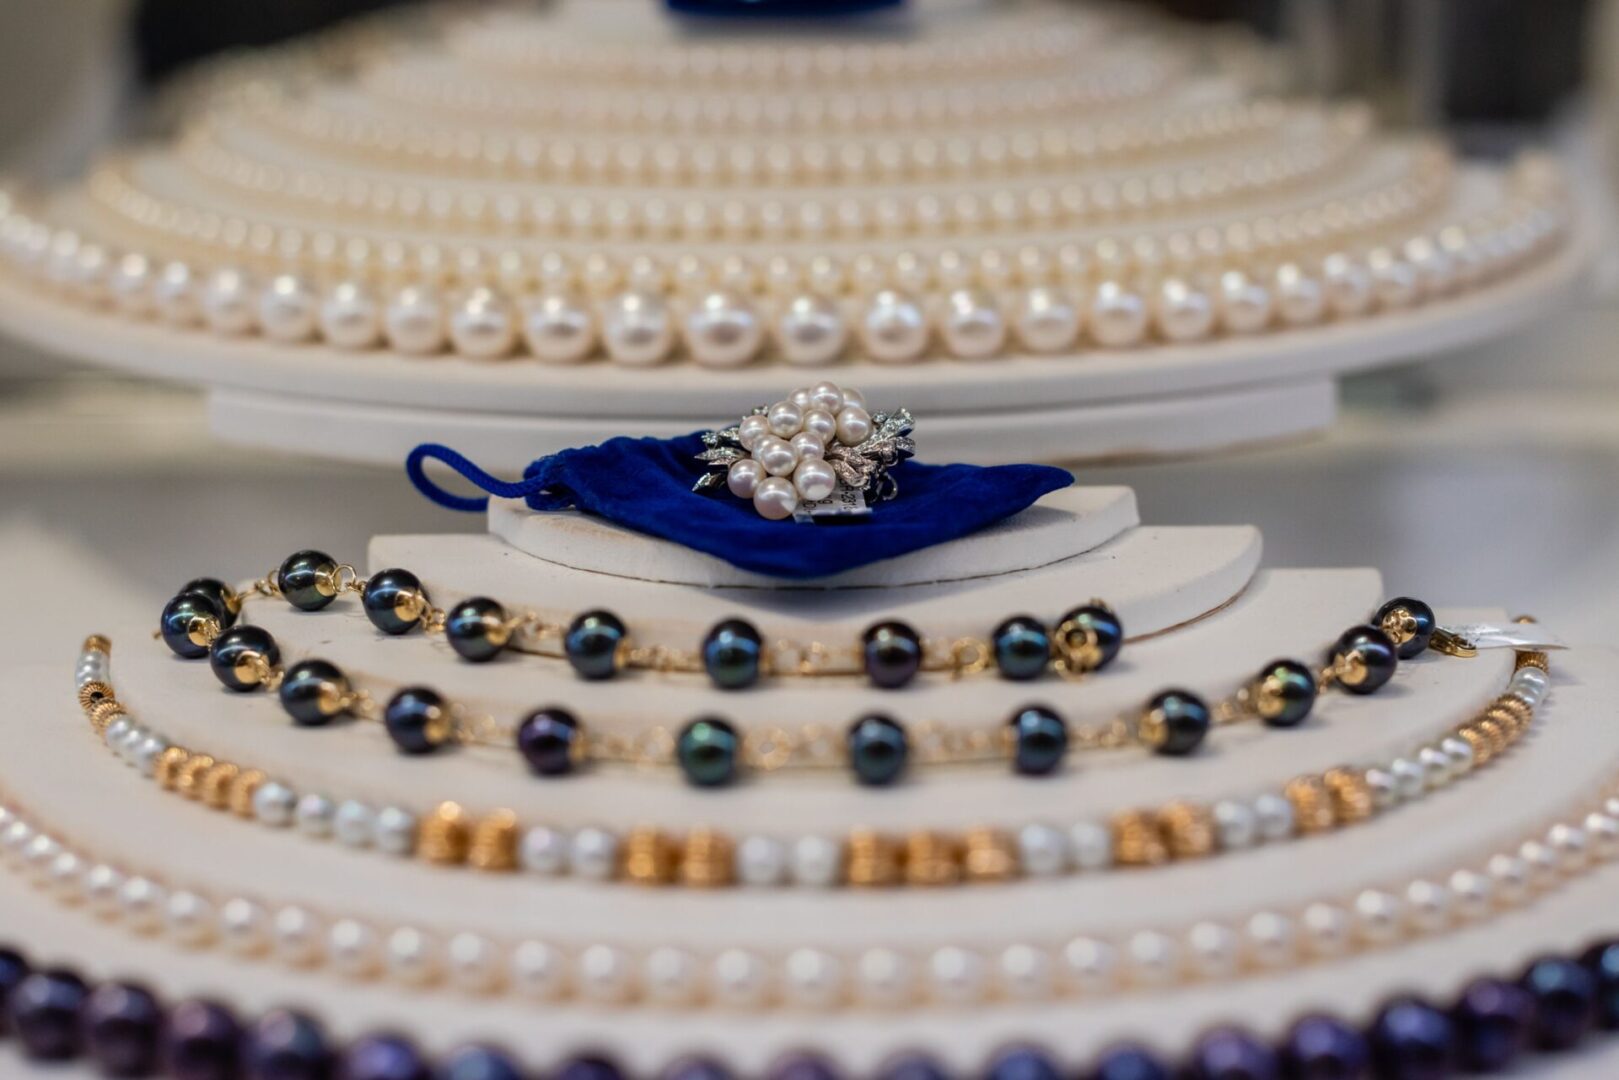 A close up of many different types of pearls